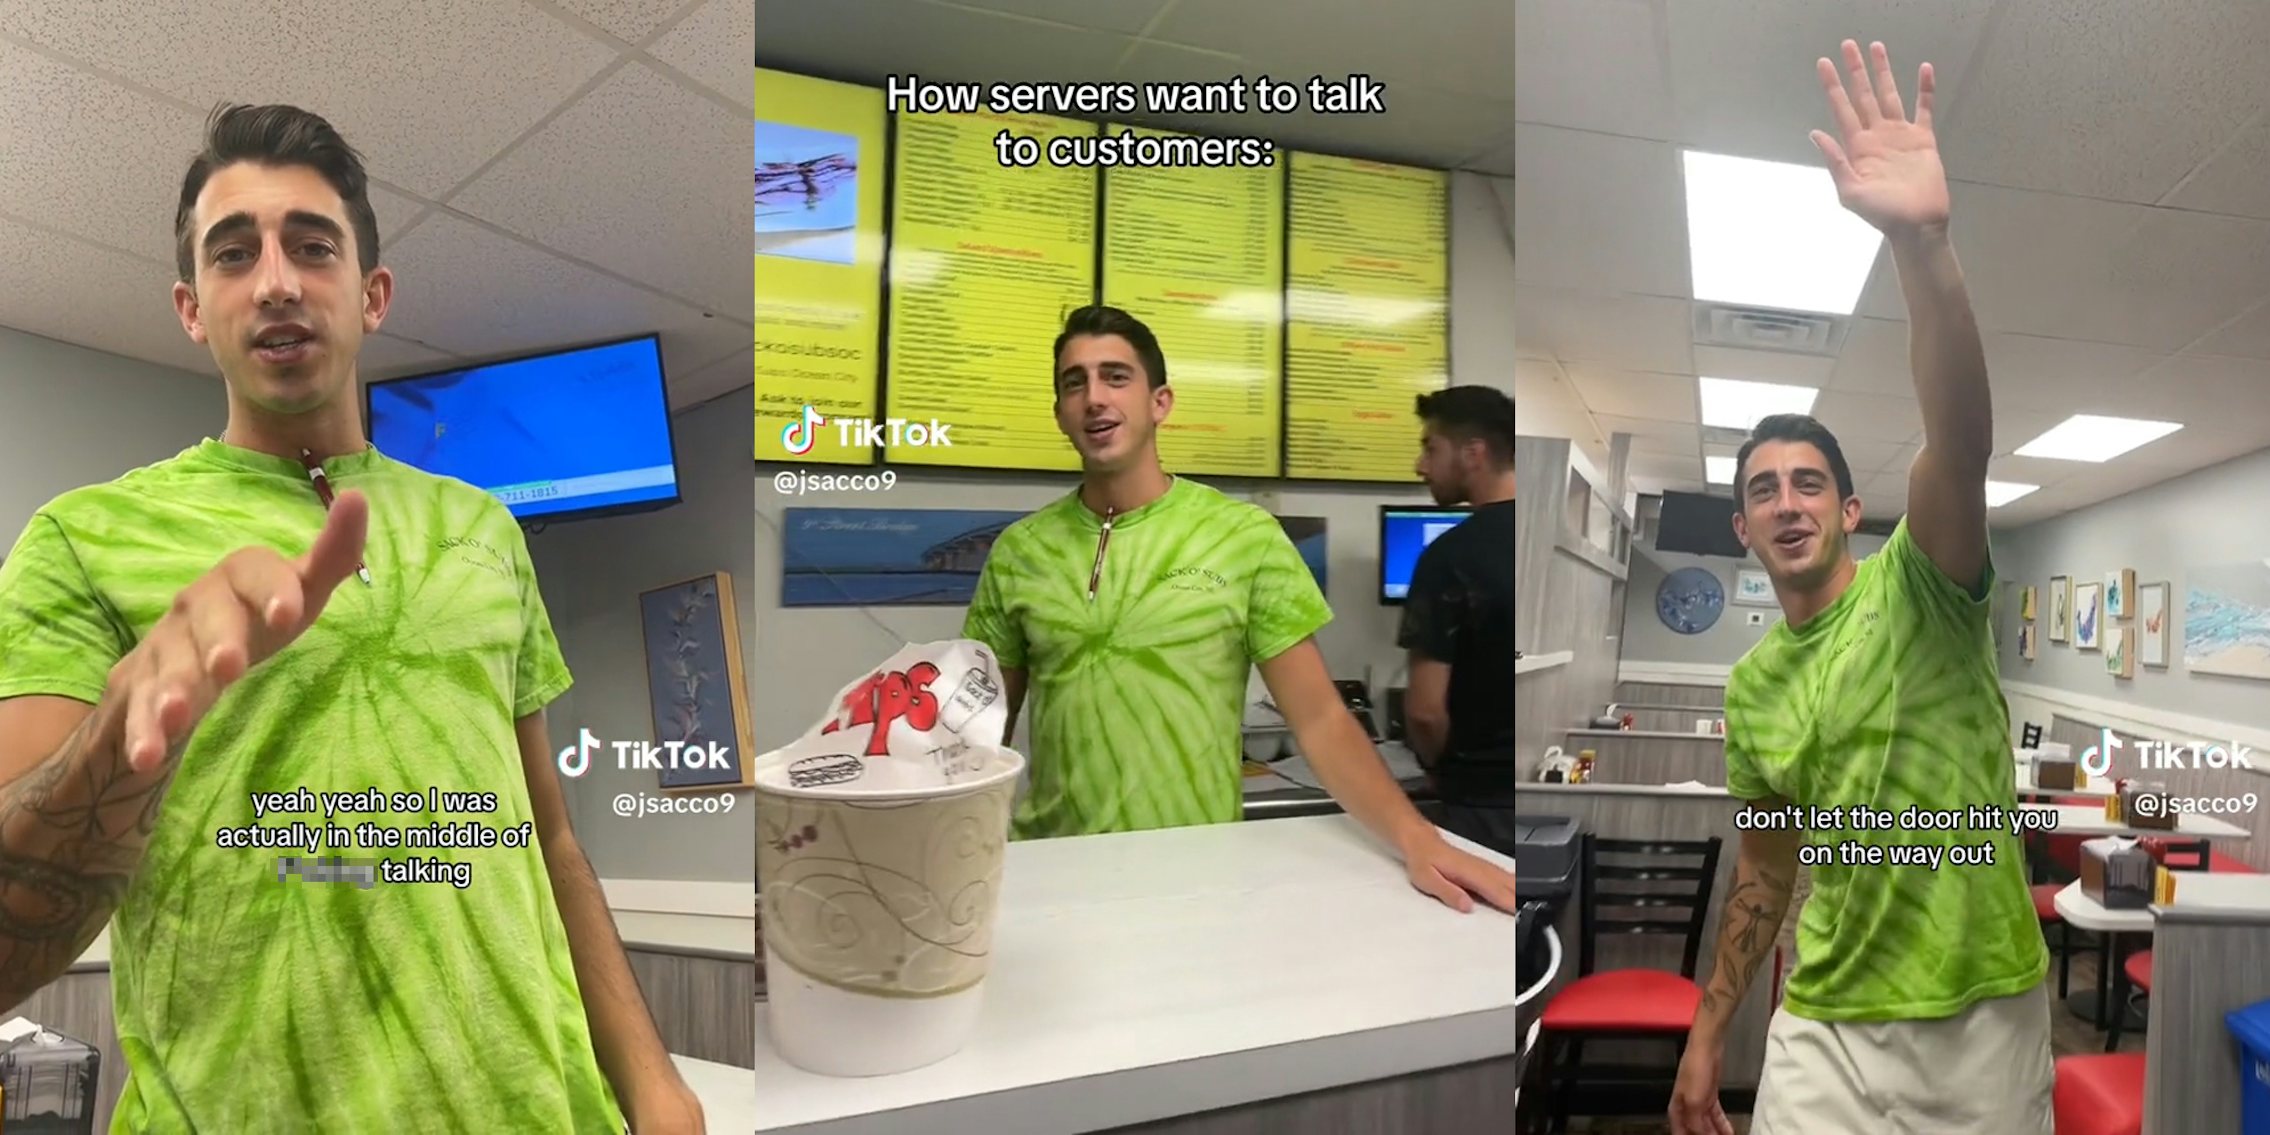 man with 'yeah yeah so I was actually in the middle of fucking talking' (l) man behind counter with caption 'How servers want to talk to customers' (c) man waving with caption 'don't let the door hit you on the way out' (r)